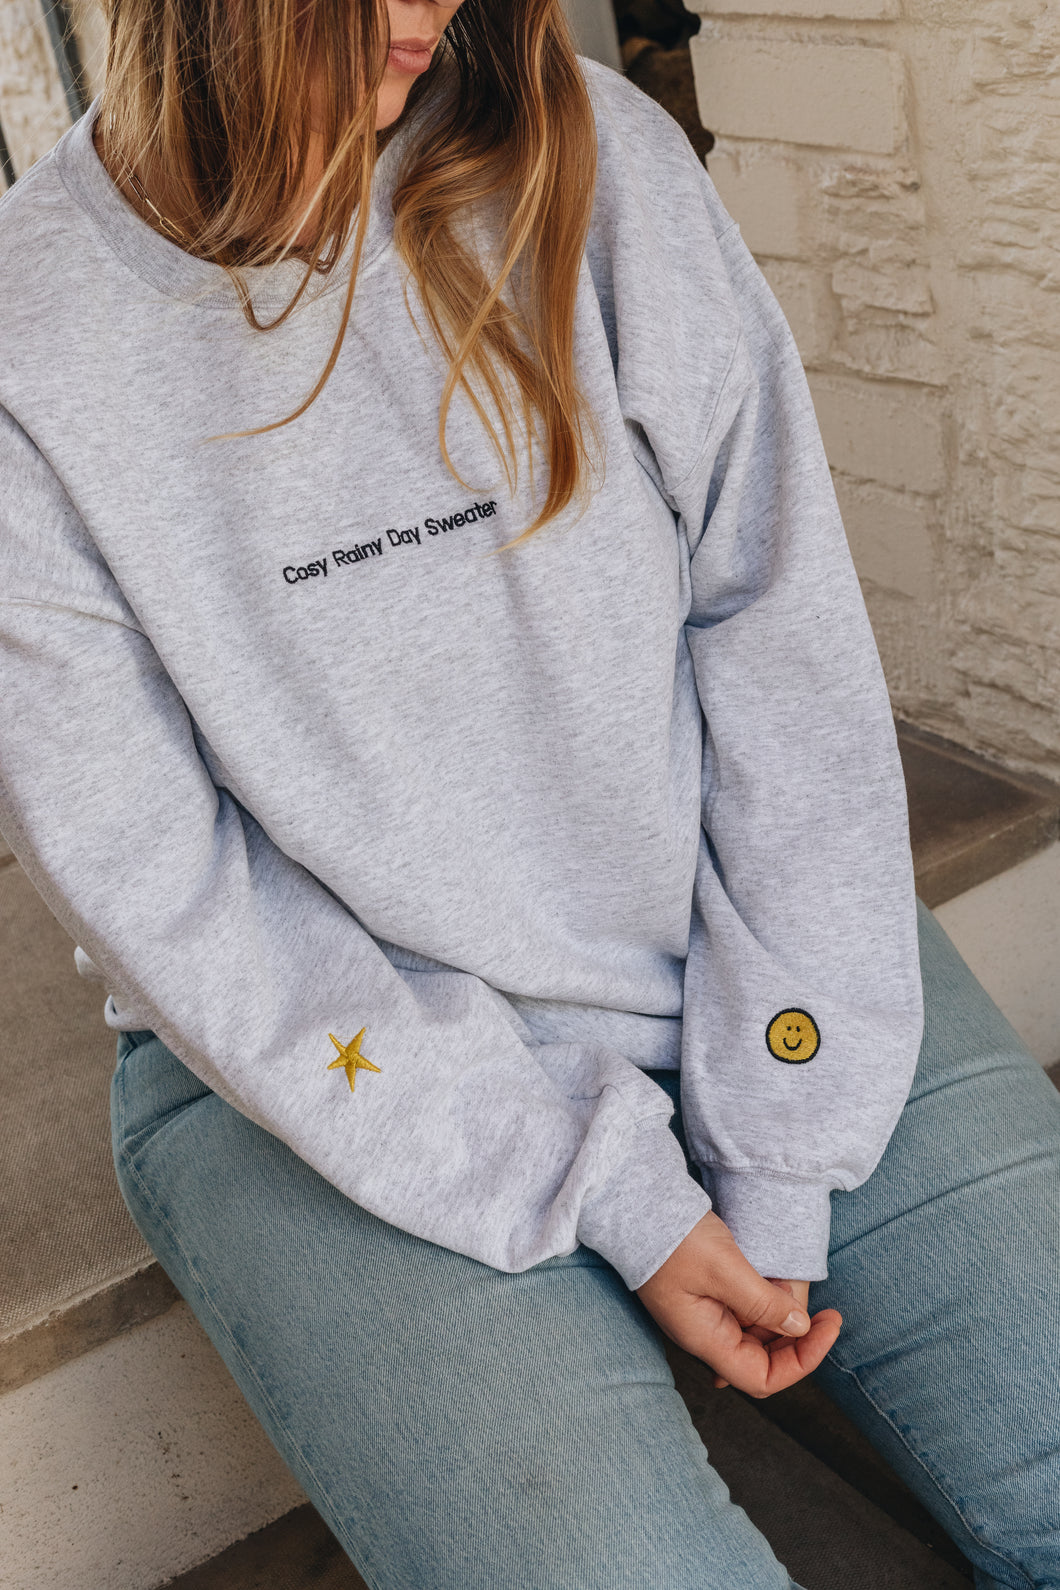 Cosy rainy day embroidered sweater